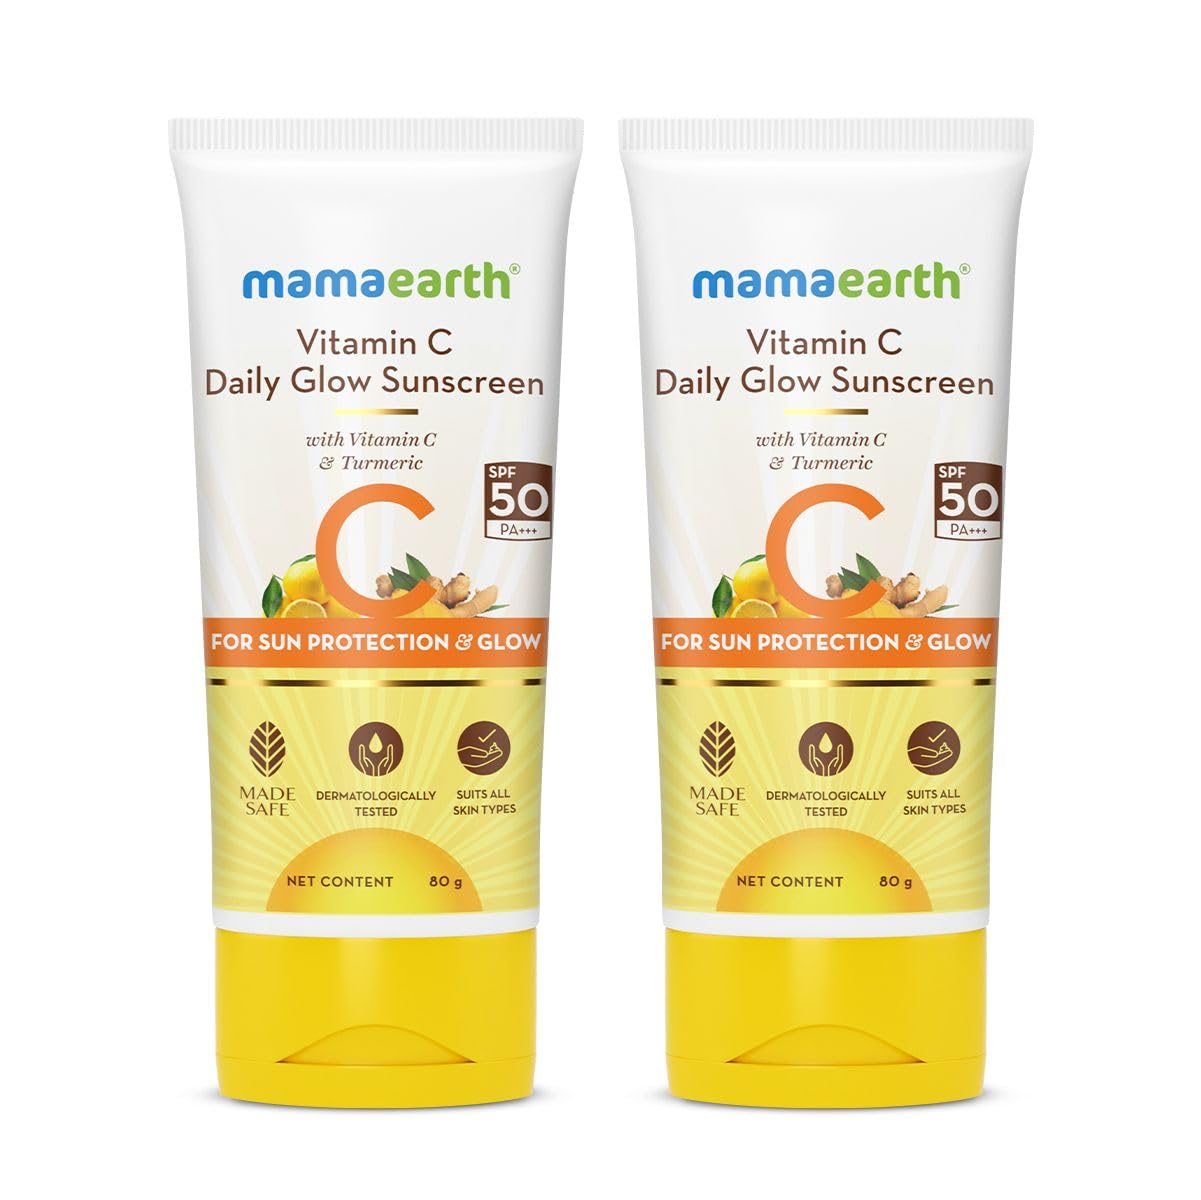 Mamaearth Vitamin C Daily Glow Sunscreen For All Skin Types Spf 50 Pa+++ | No White Cast With Vitamin C & Turmeric, Lightweight, For Sun Protection & Glow - 80 G, Pack Of 1